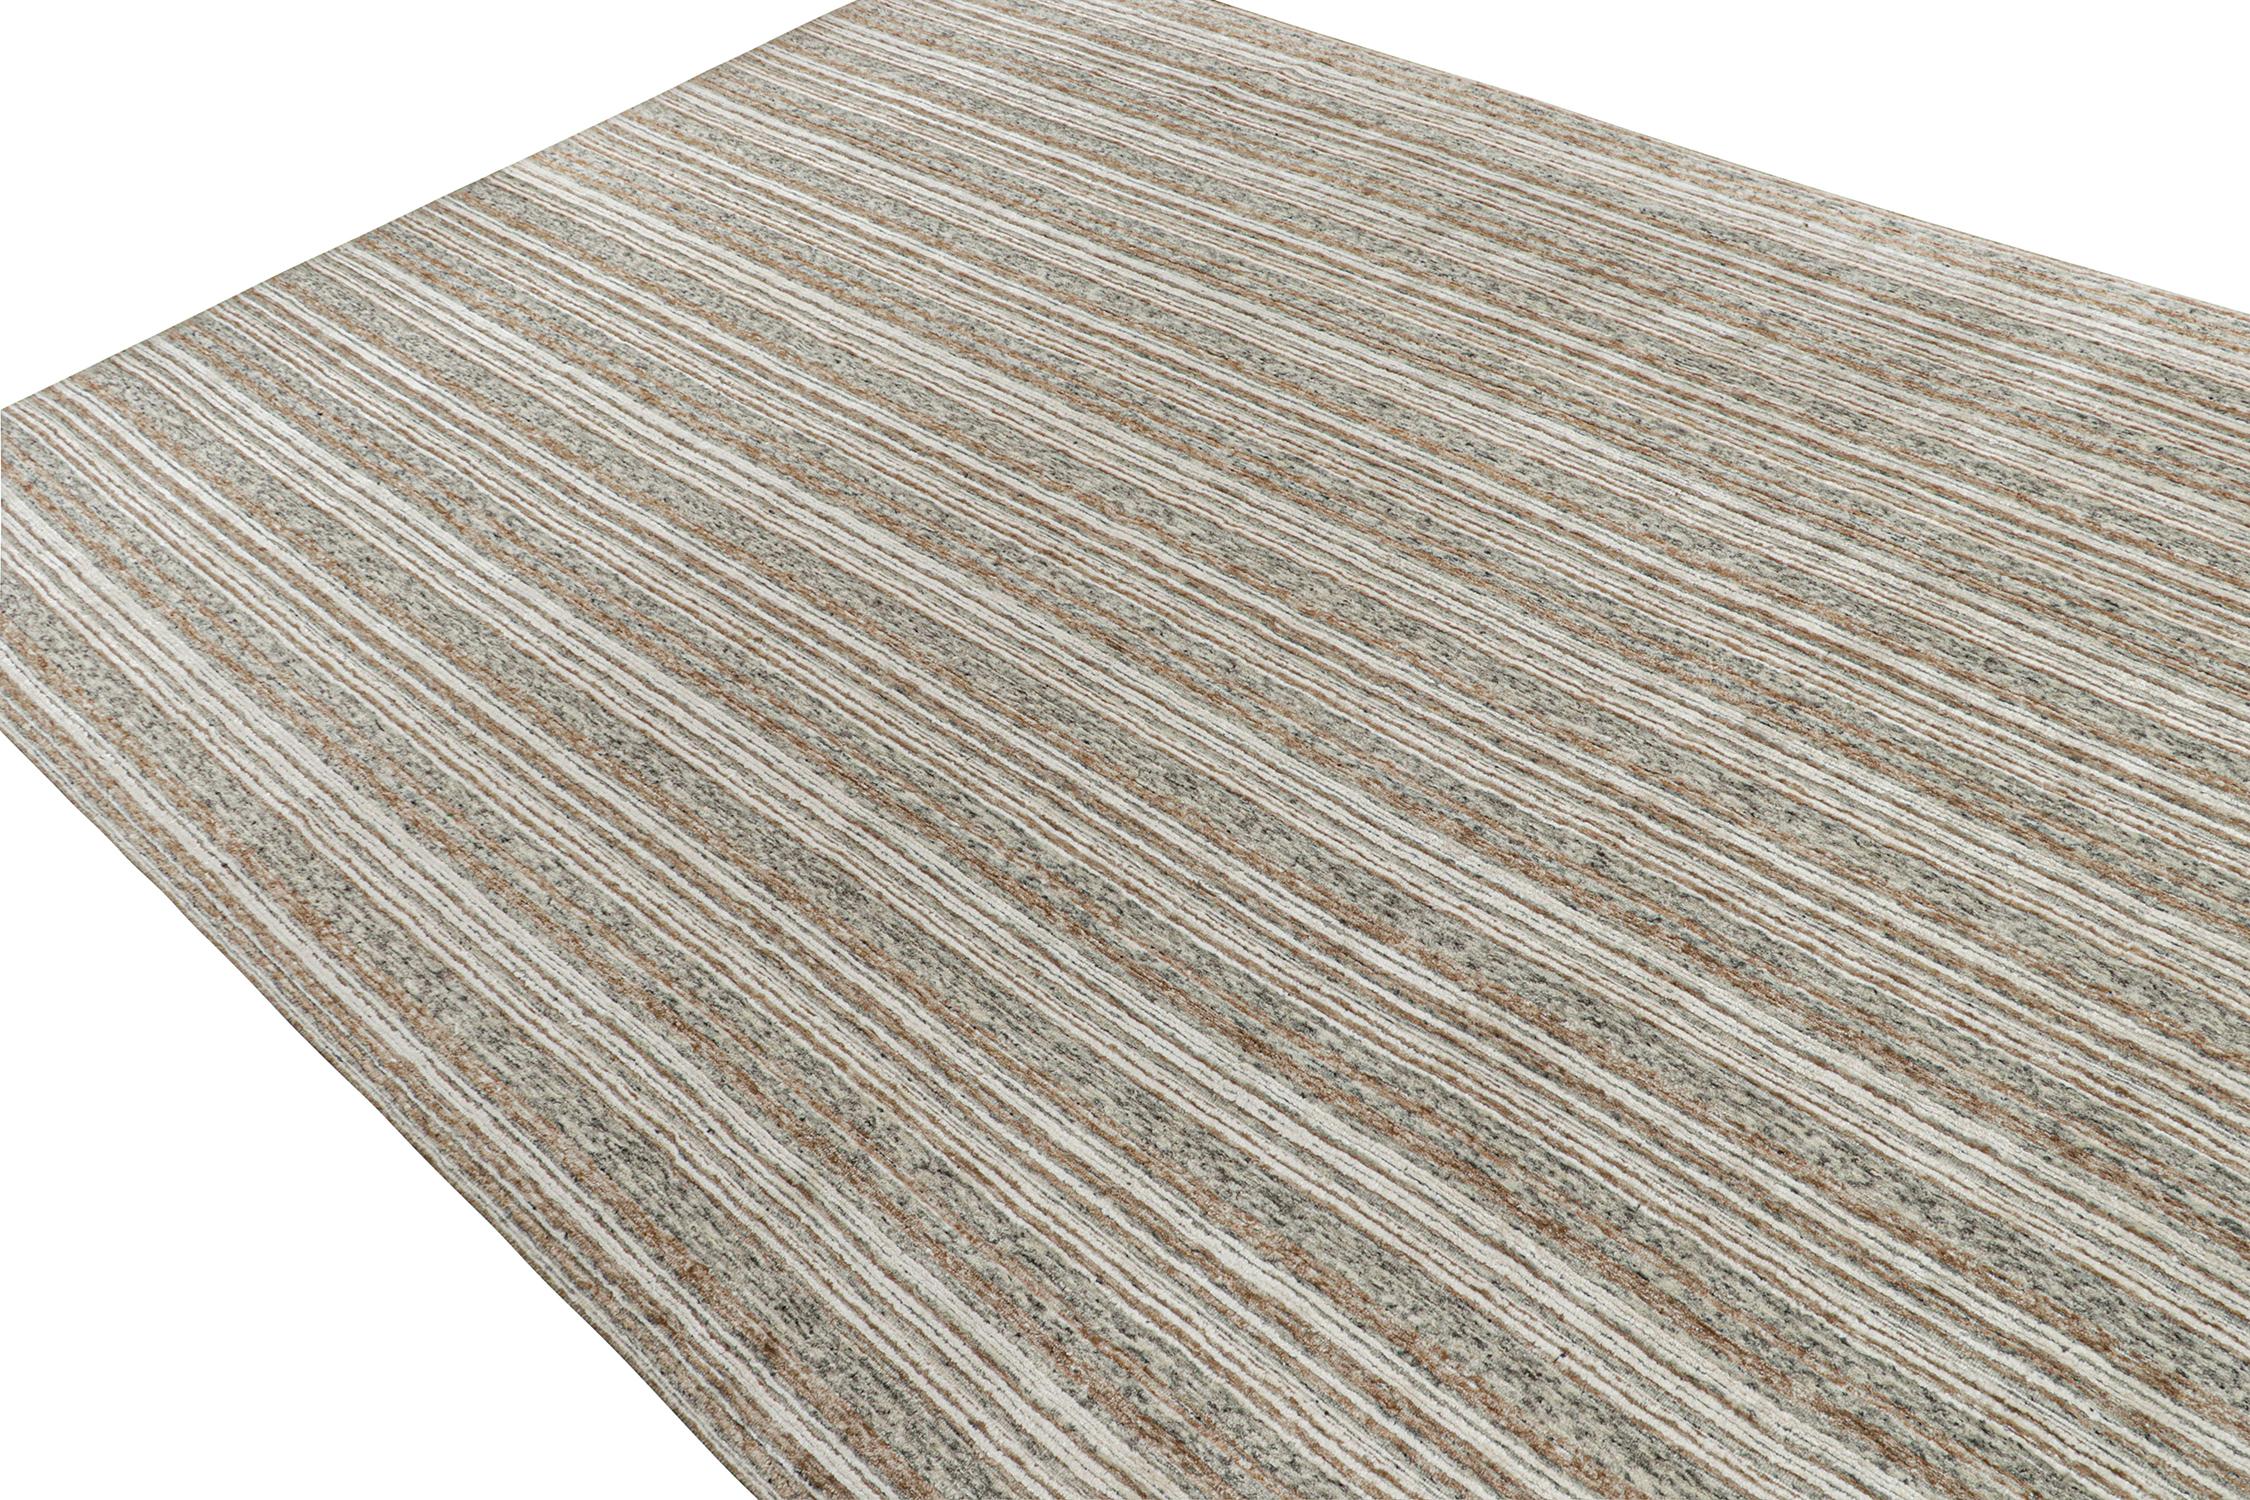 Indian Rug & Kilim’s Modern Oversized Rug in Beige, White and Gray Stripes For Sale